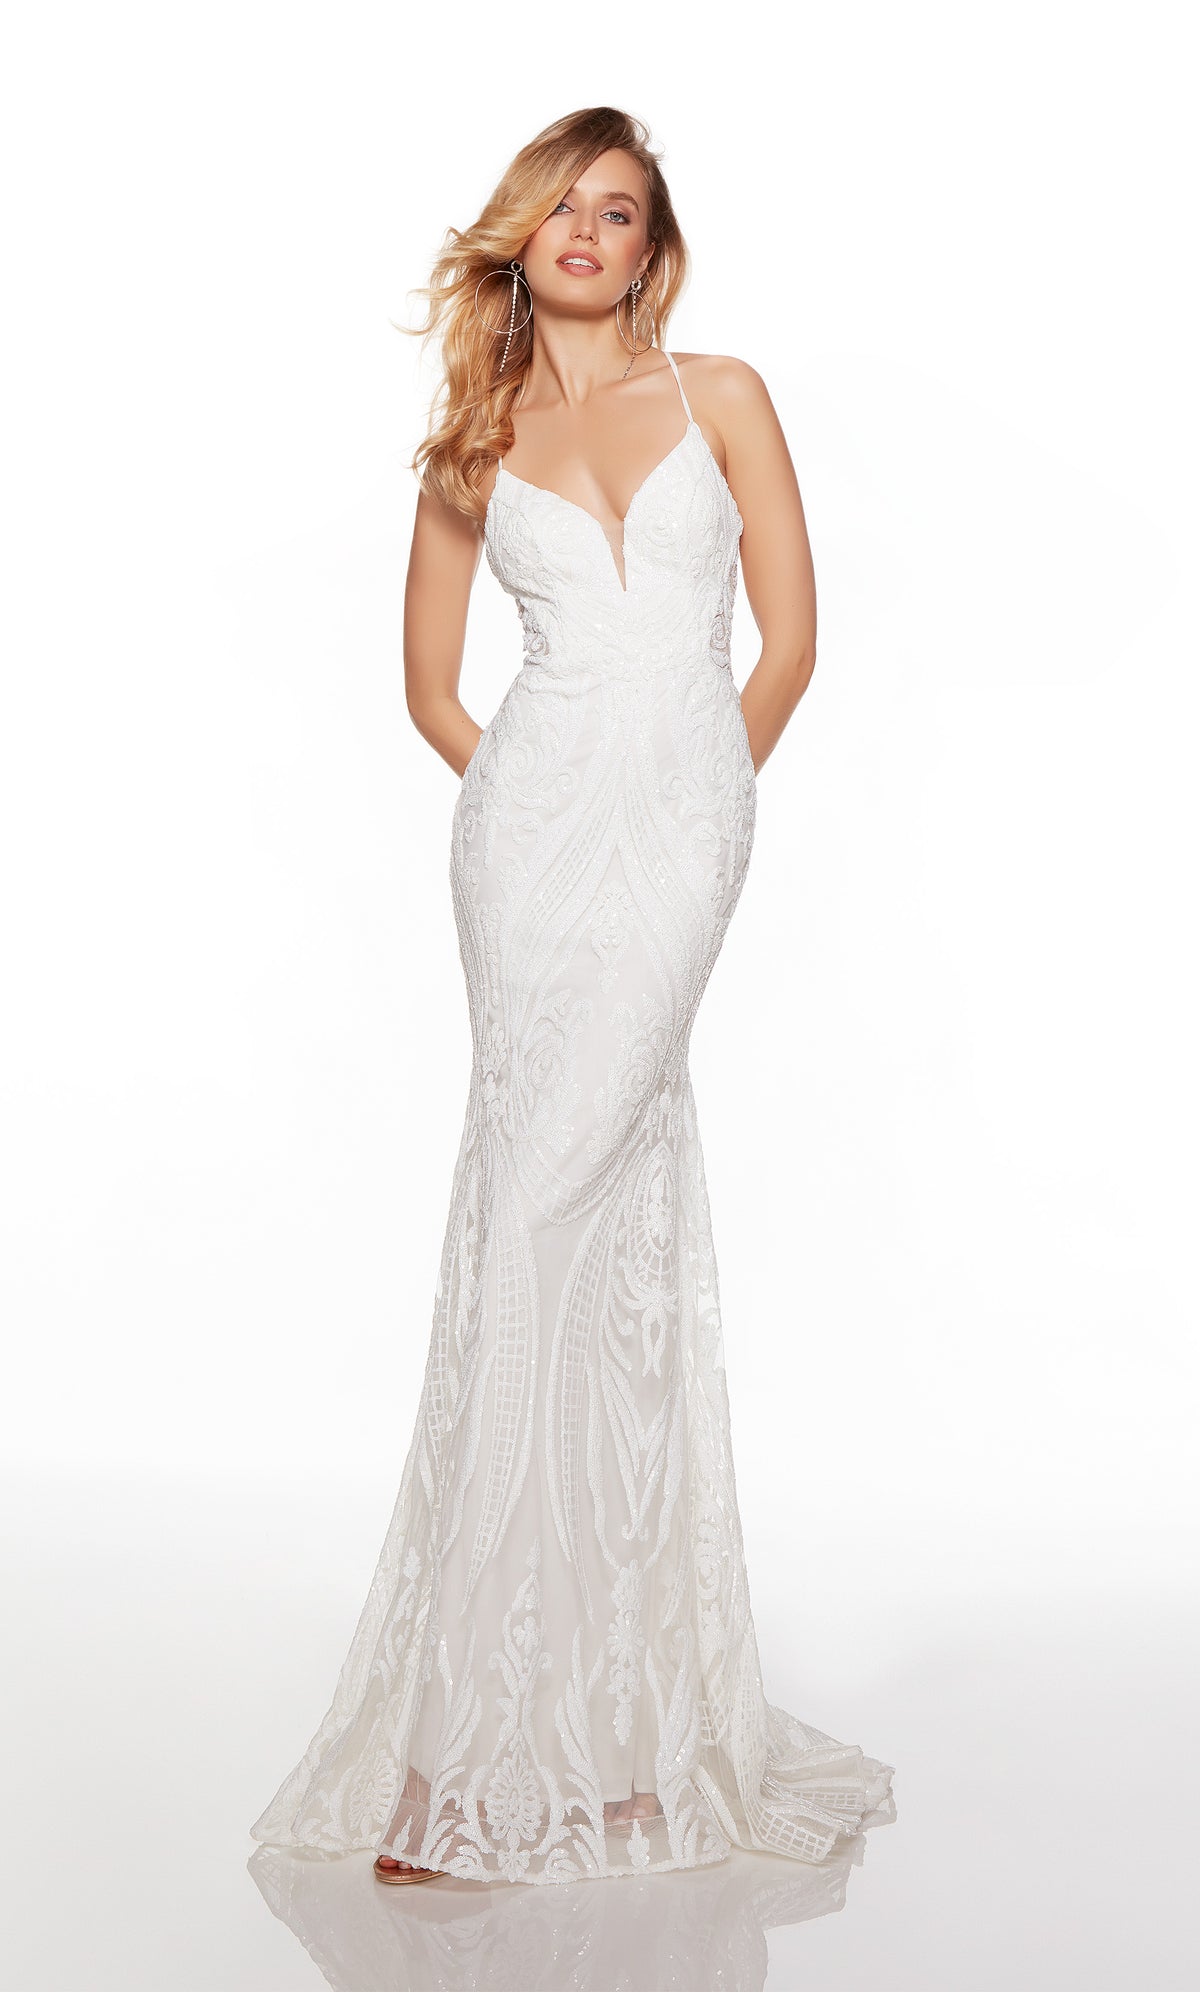 Sexy white gown with a plunging neckline and sequin detail throughout.